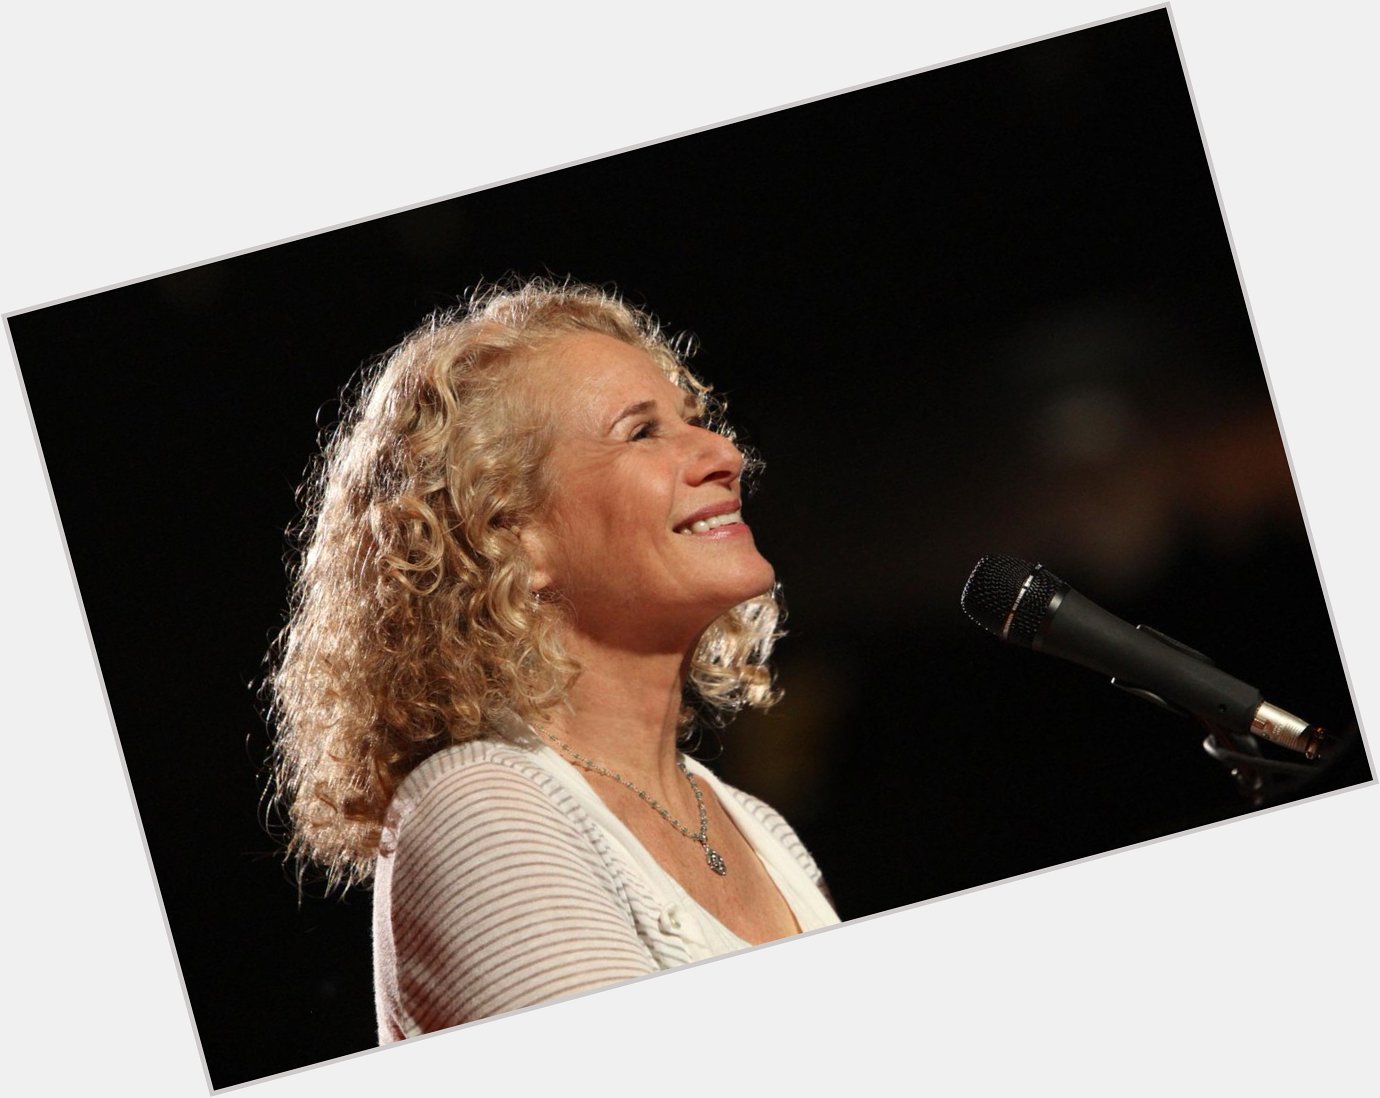   Happy birthday to one of the great women of rock... Carole King is 73 today :-) 